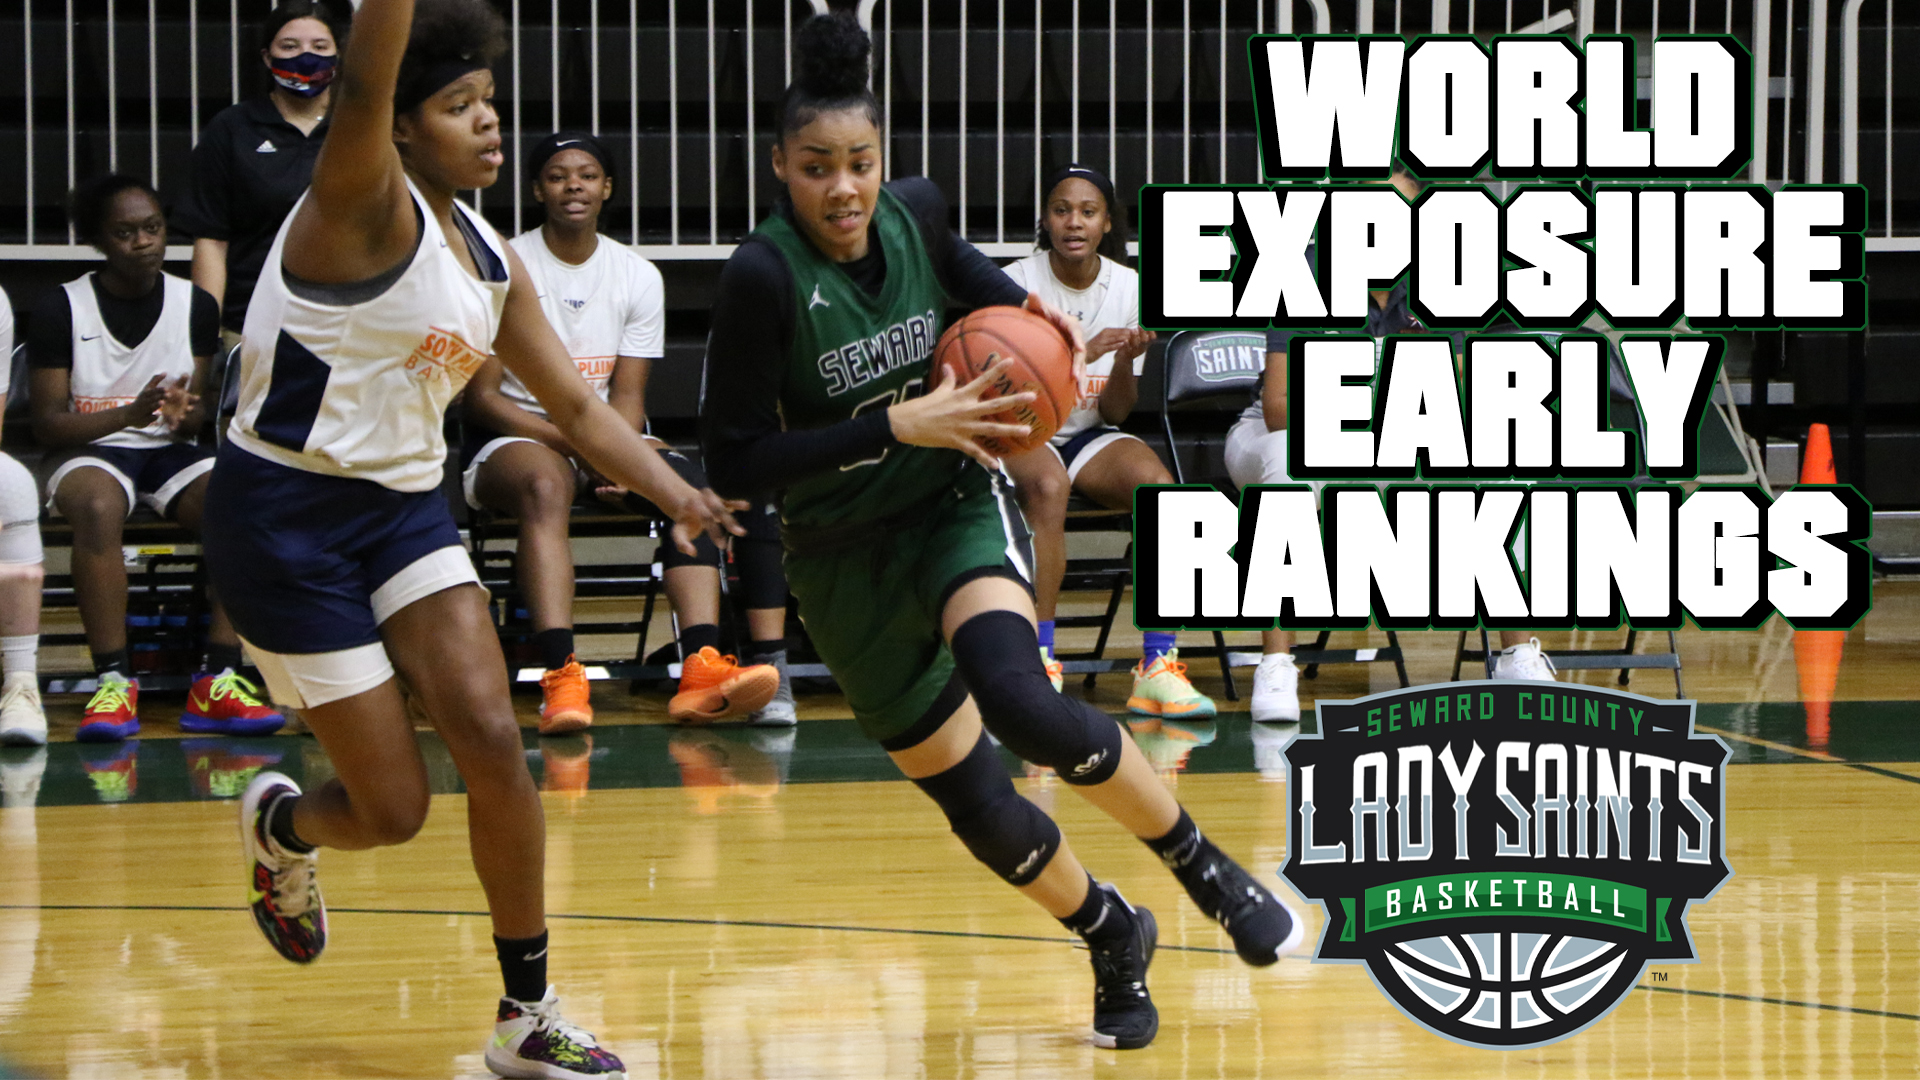 Lady Saints placed in the Top 20 Preseason Ranking